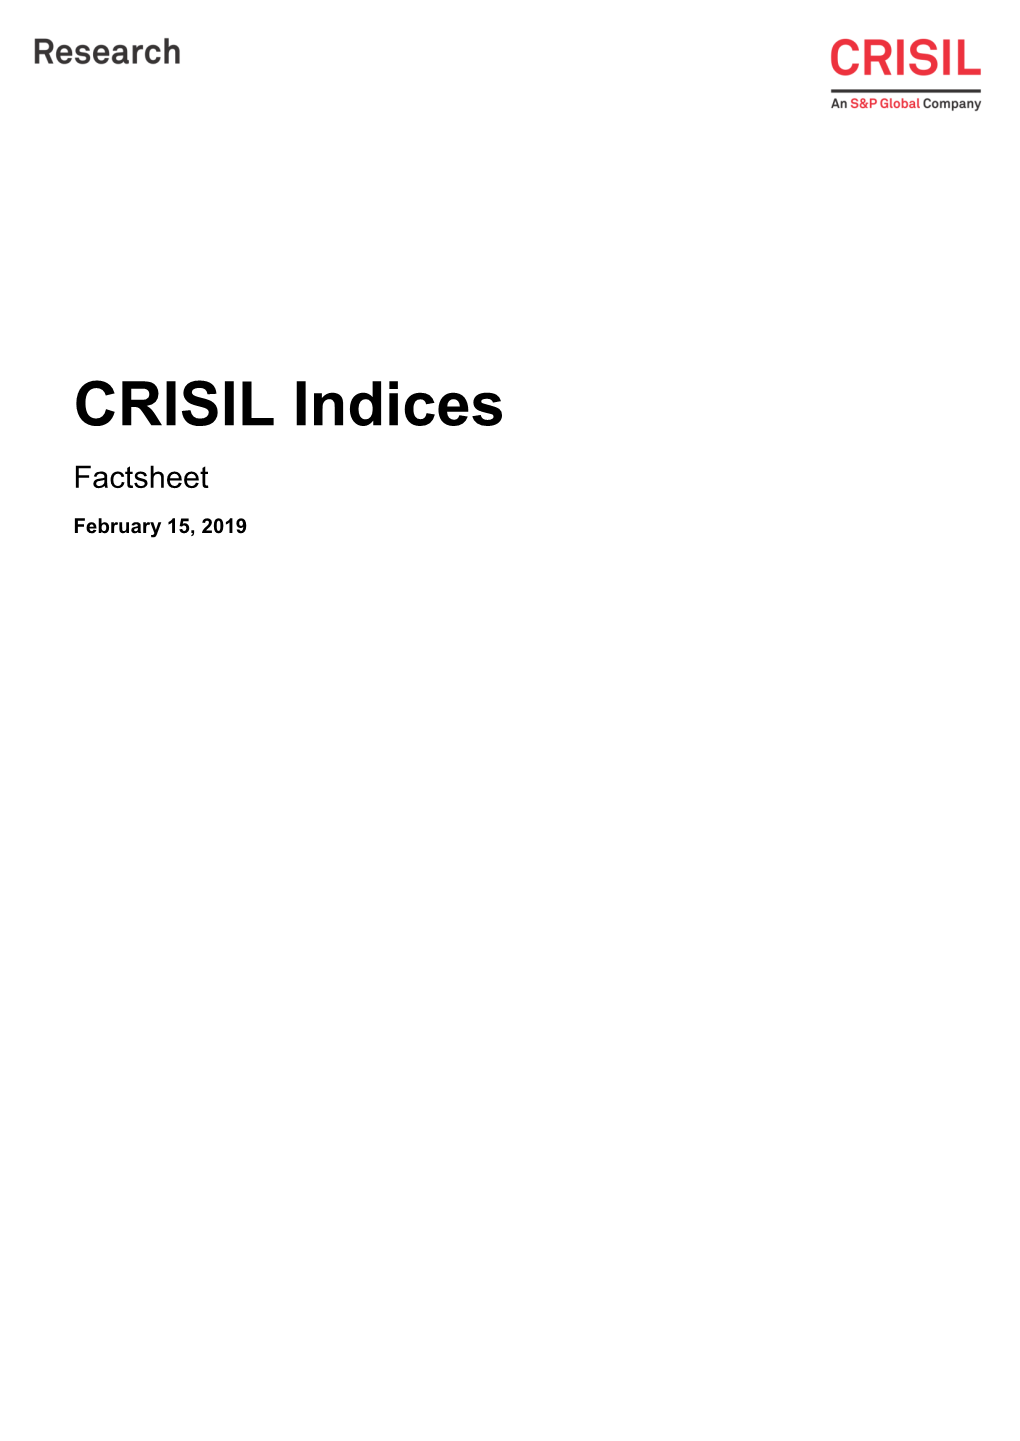 List of CRISIL Indices – Objectives and Inception Dates